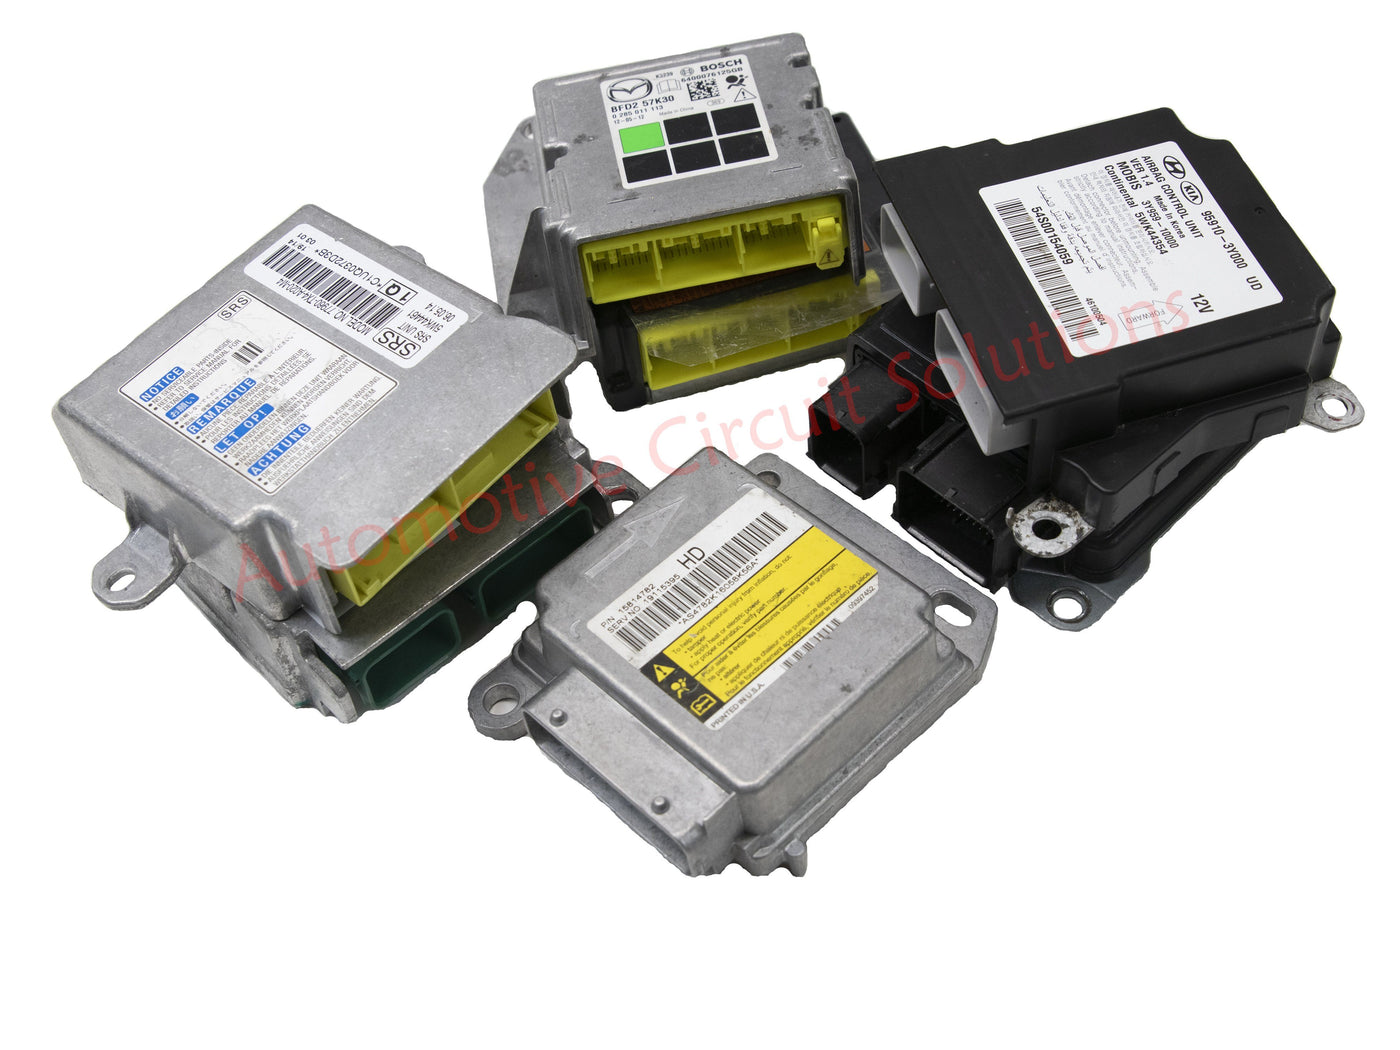 MITSUBISHI SRS AIRBAG CONTROL MODULE RESET SERVICE (24H Turn Around) SRS Module Reset Automotive Circuit Solutions 